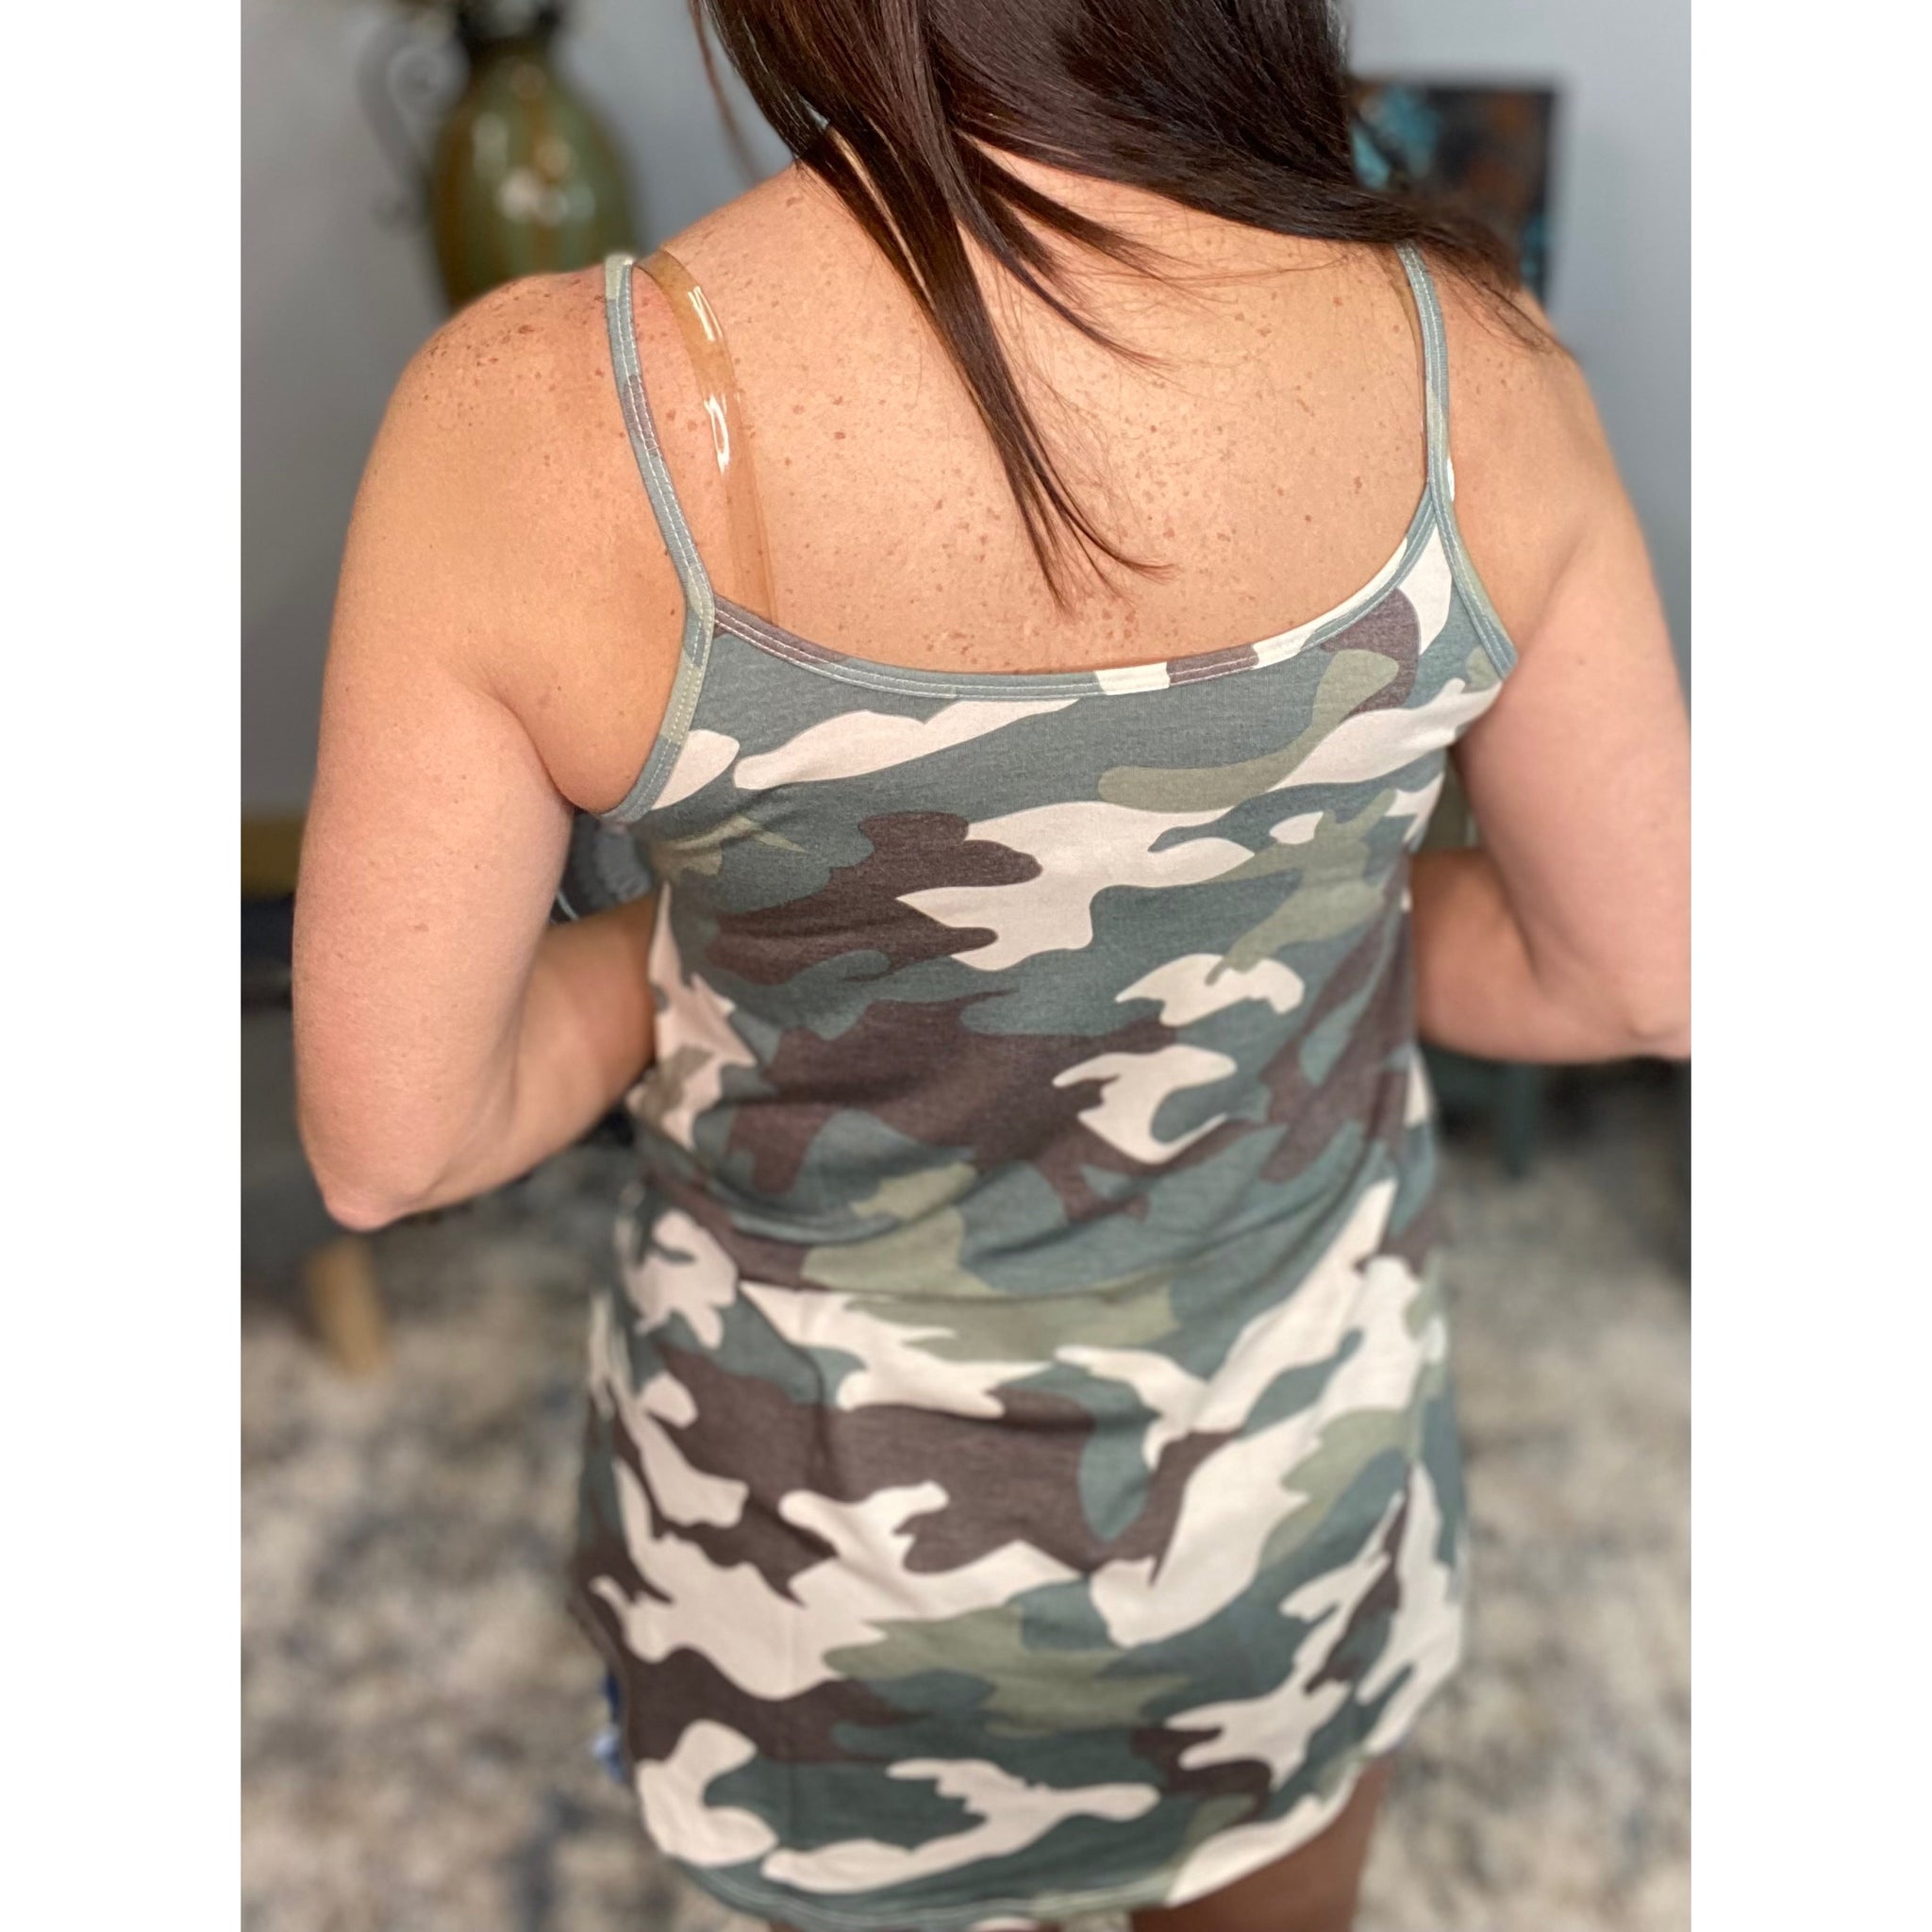 “Heat Wave” Reversible Camouflage Low Scoop Or V-Neck Tank Shirt Top Green 1X/2X/3X